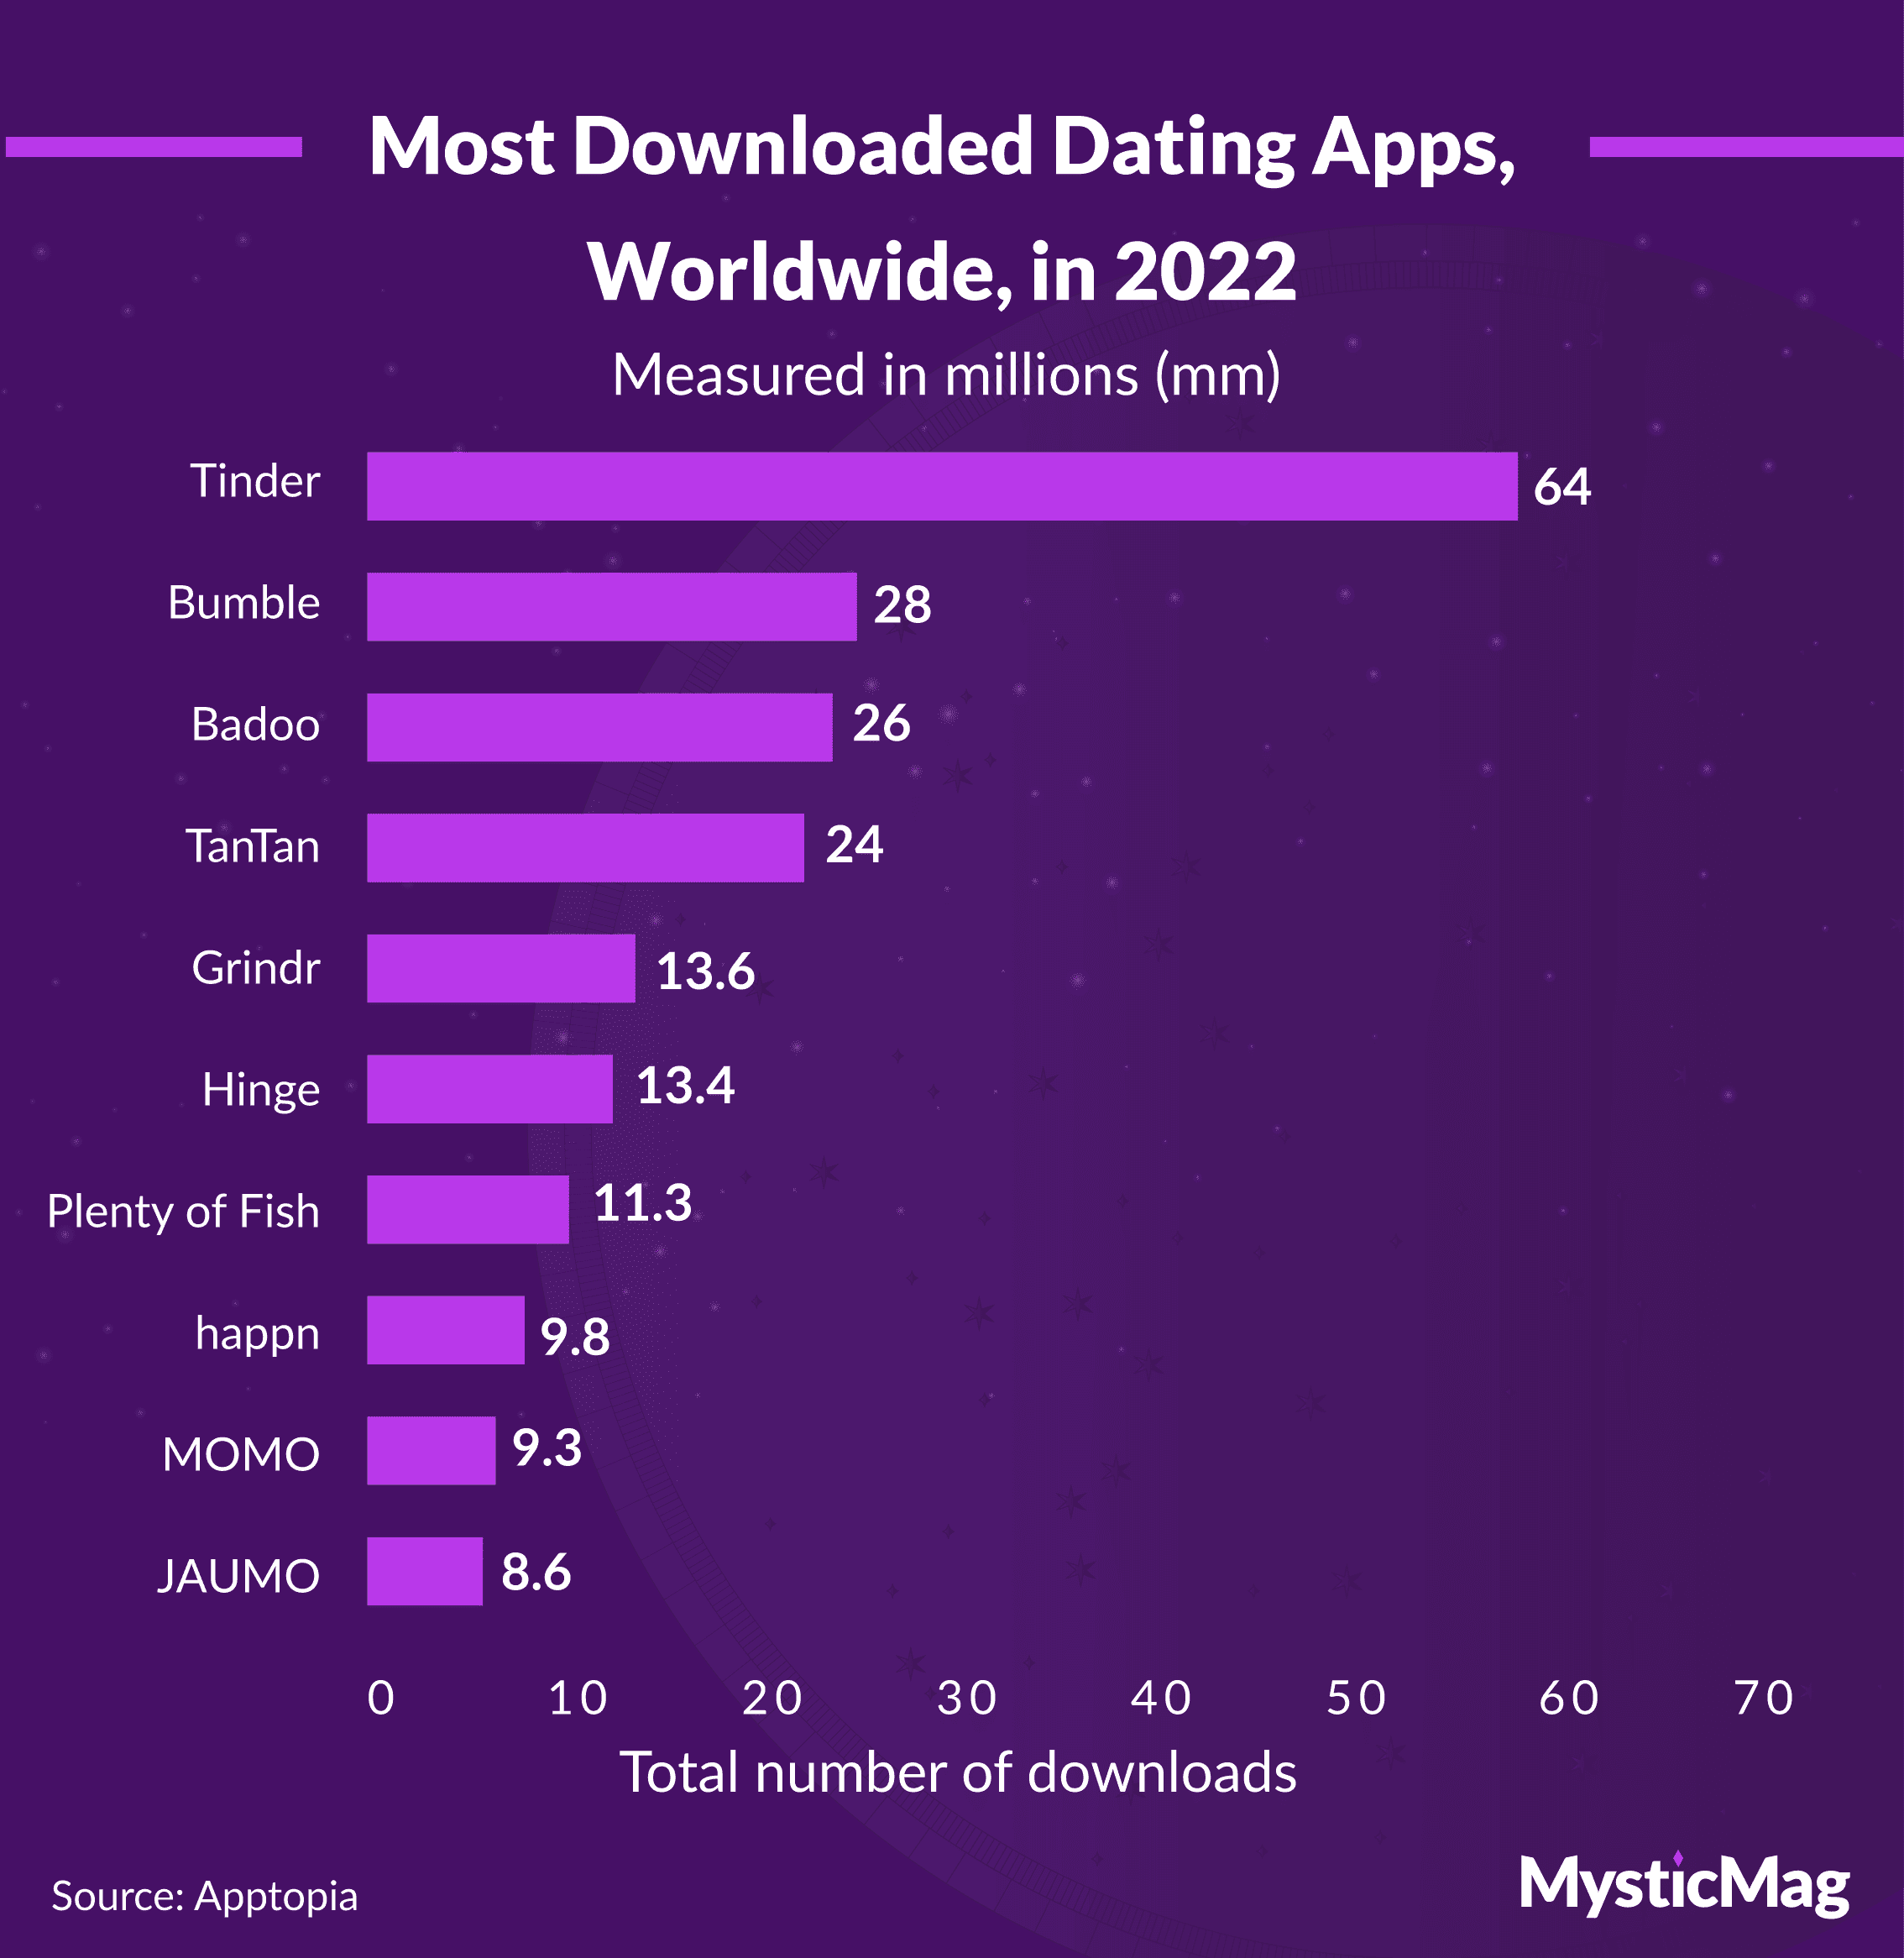 Most downloaded dating apps in 2022